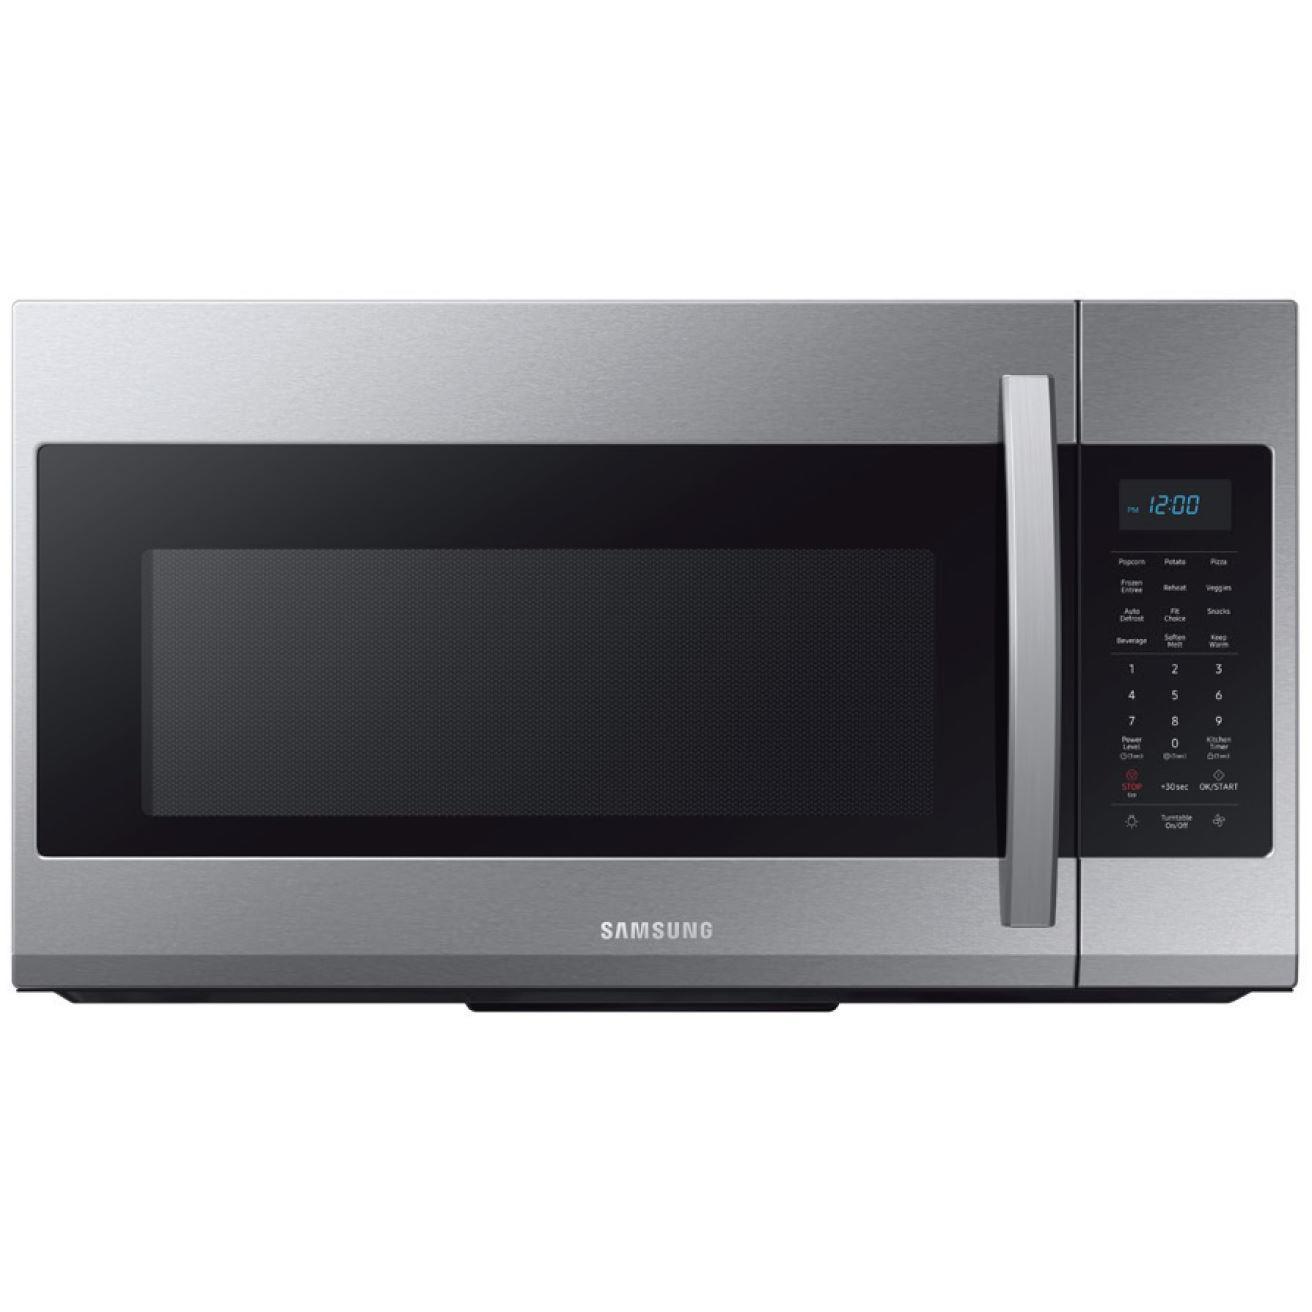 Samsung 30-inch, 1.9 cu.ft. Over-the-Range Microwave Oven with Eco Mode ME19R7041FB/AA